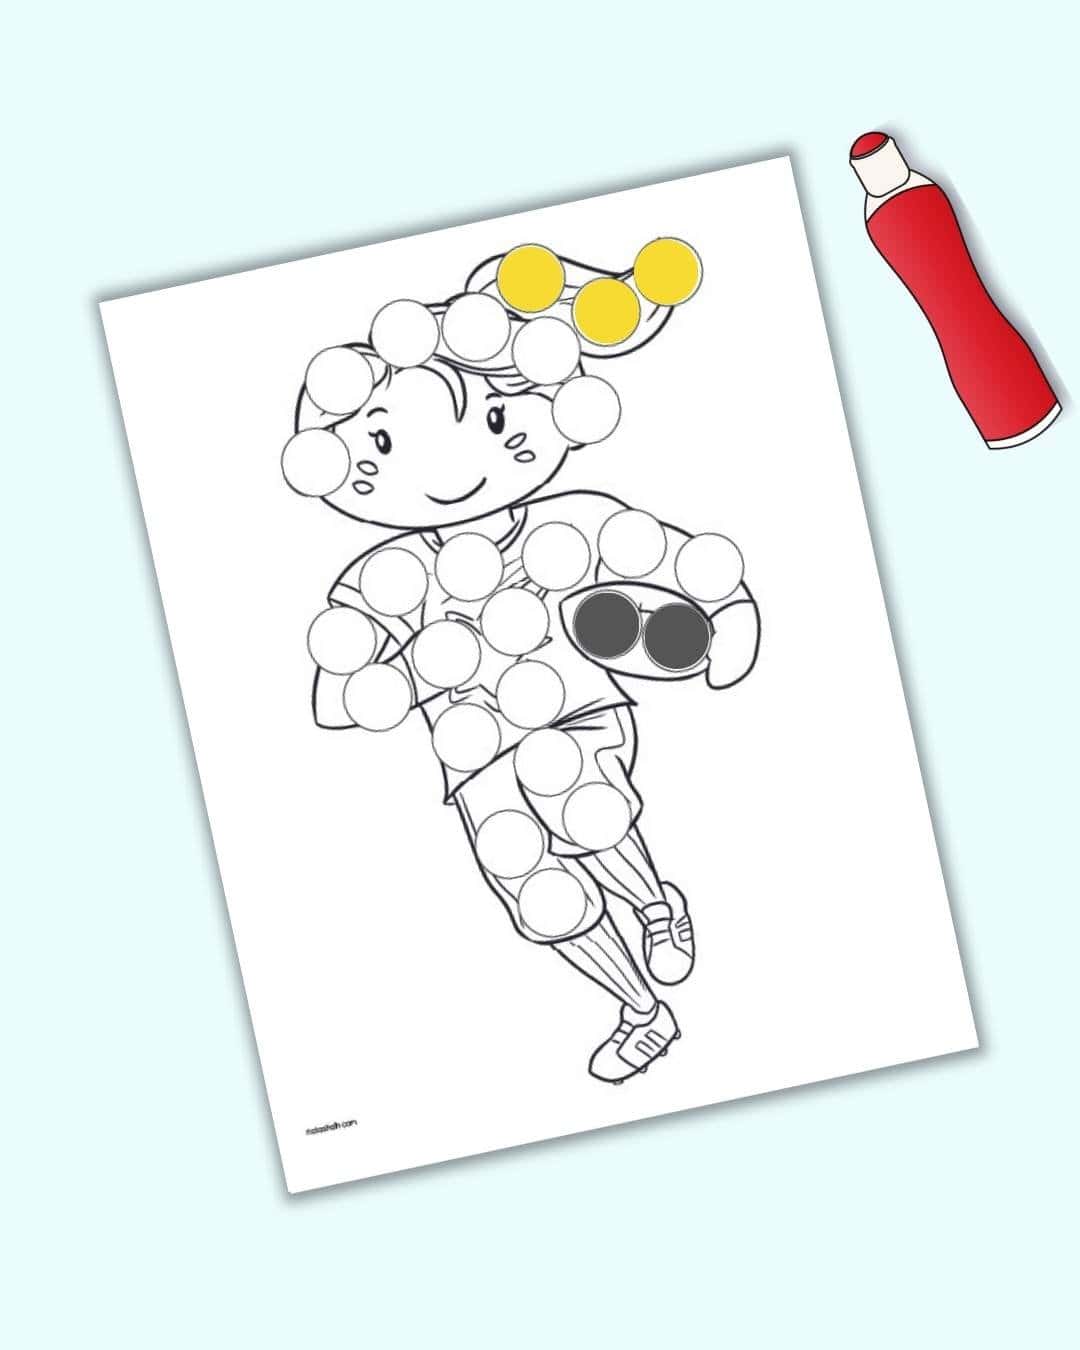 A mockup of a partially completed dot marker coloring page showing a girl running with a football